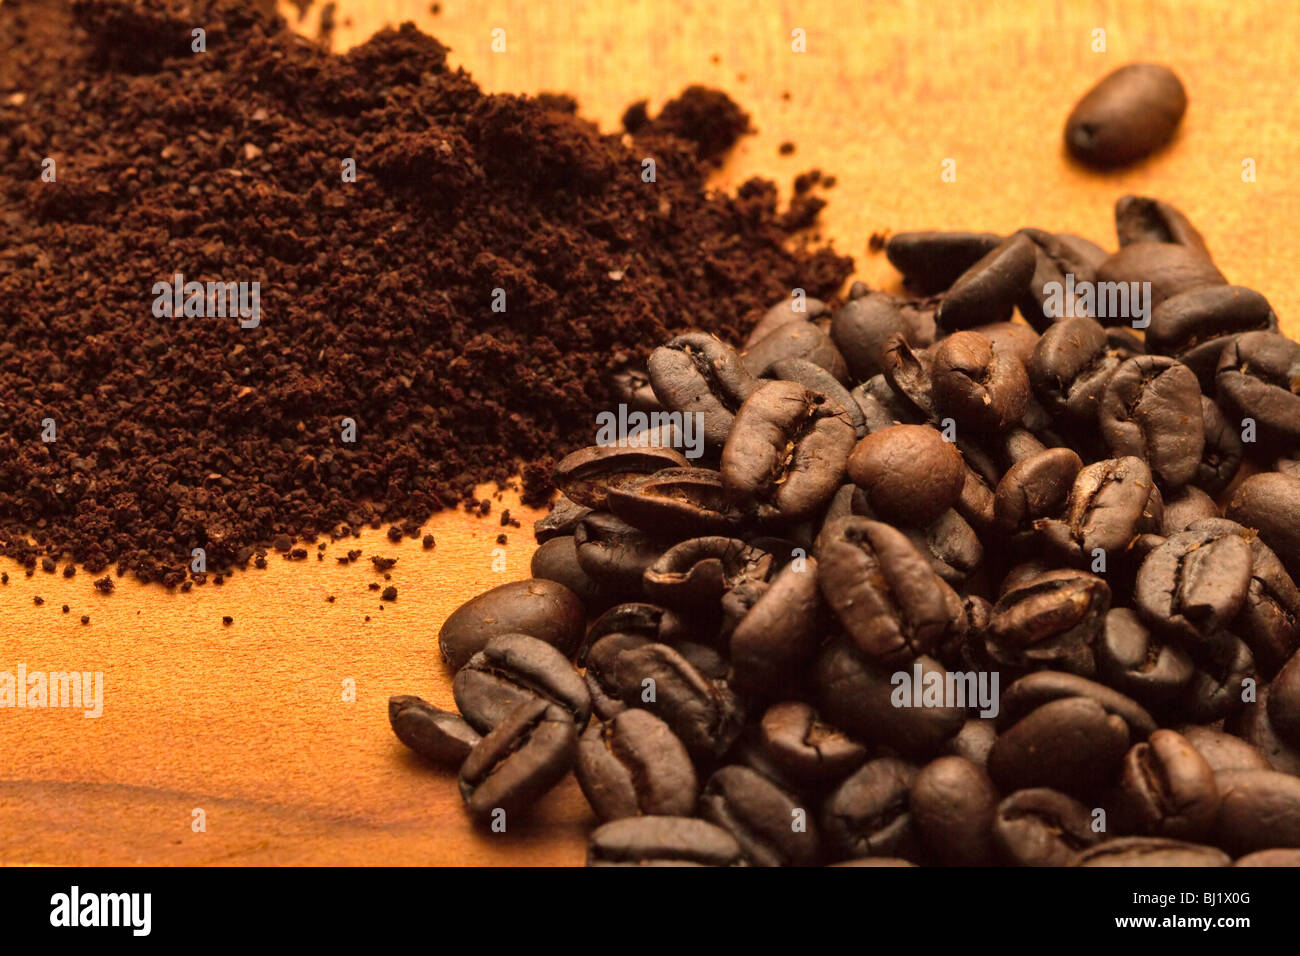 Arabica coffee, whole beans and freshly ground Stock Photo